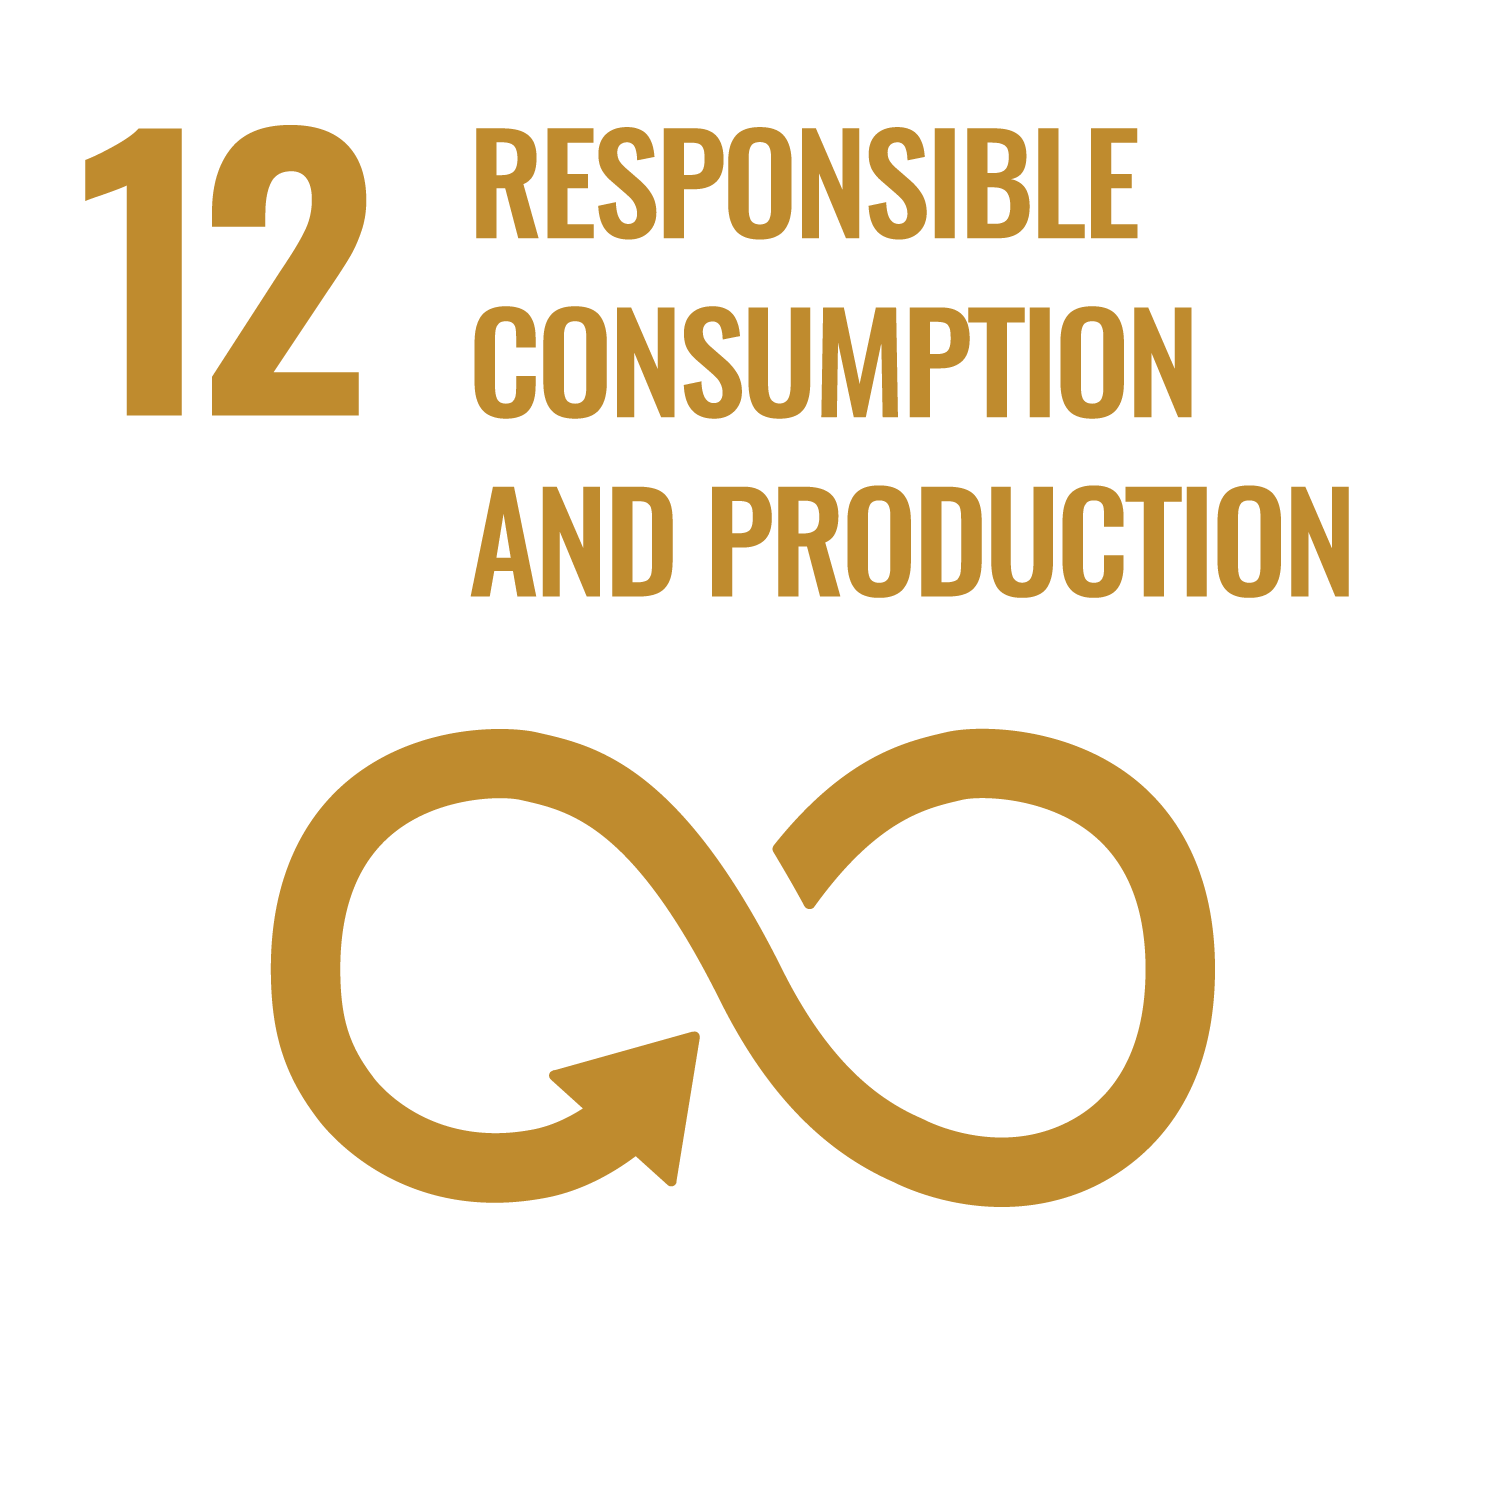 Goal 12 - Responsible consumption and production